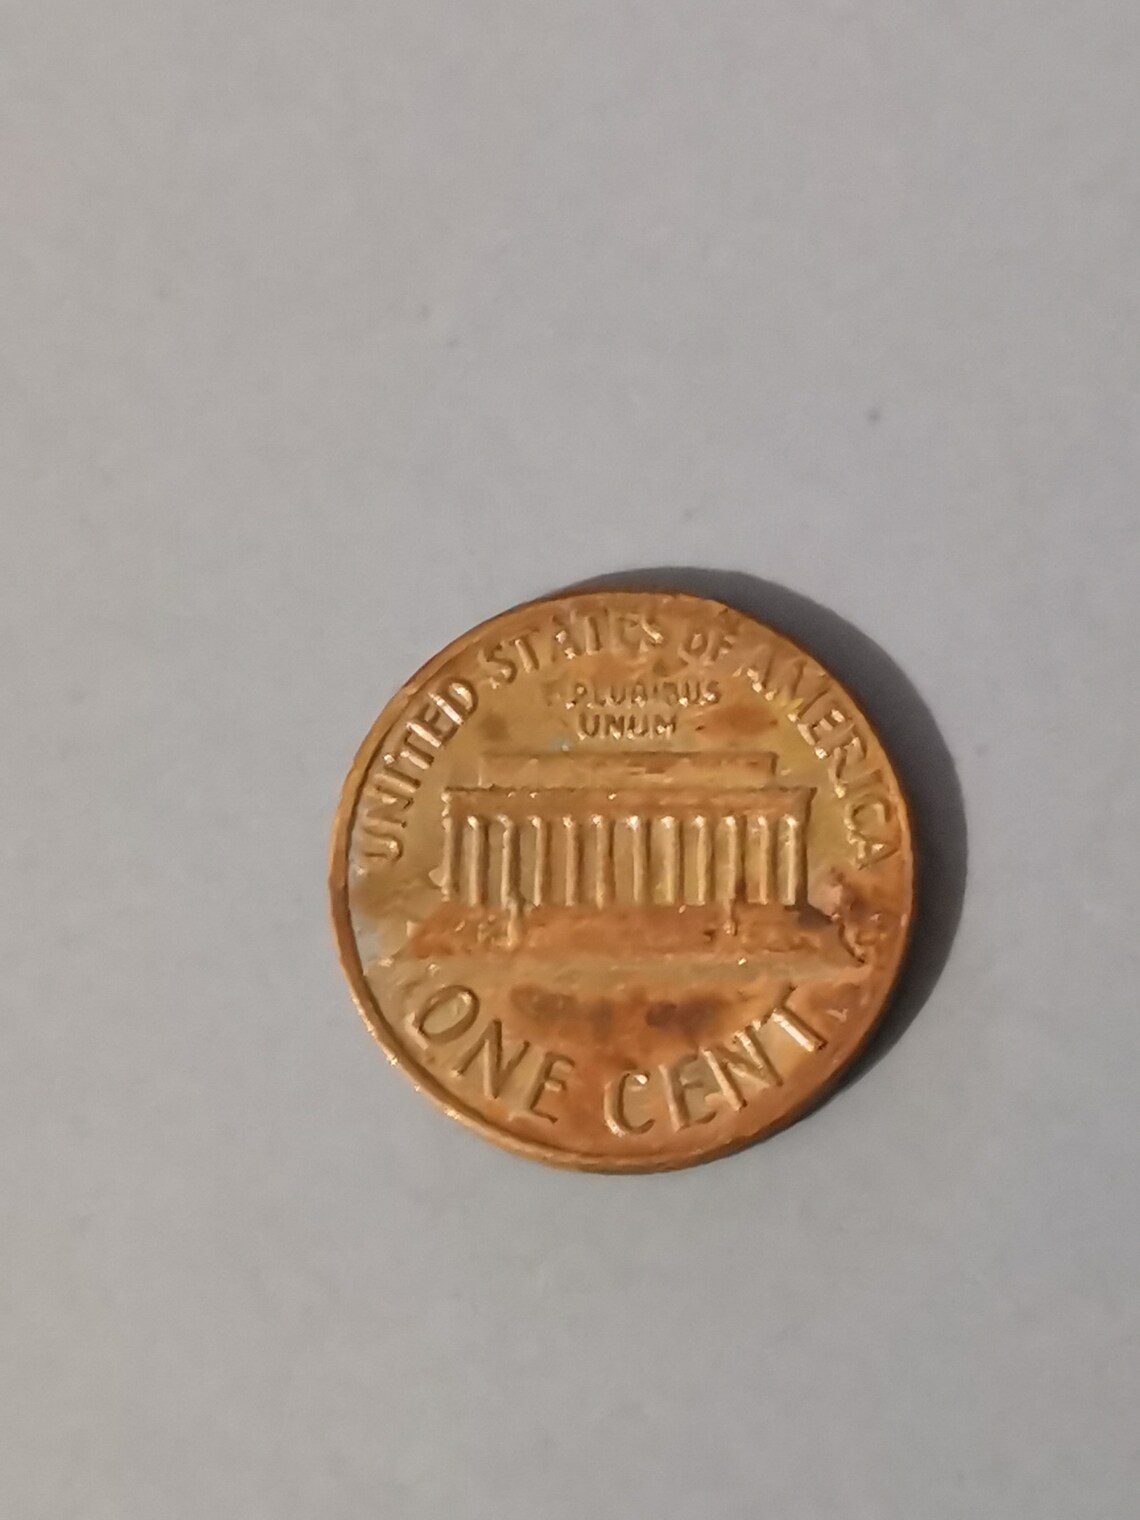 American 1 cent 1972 rare coin | Etsy